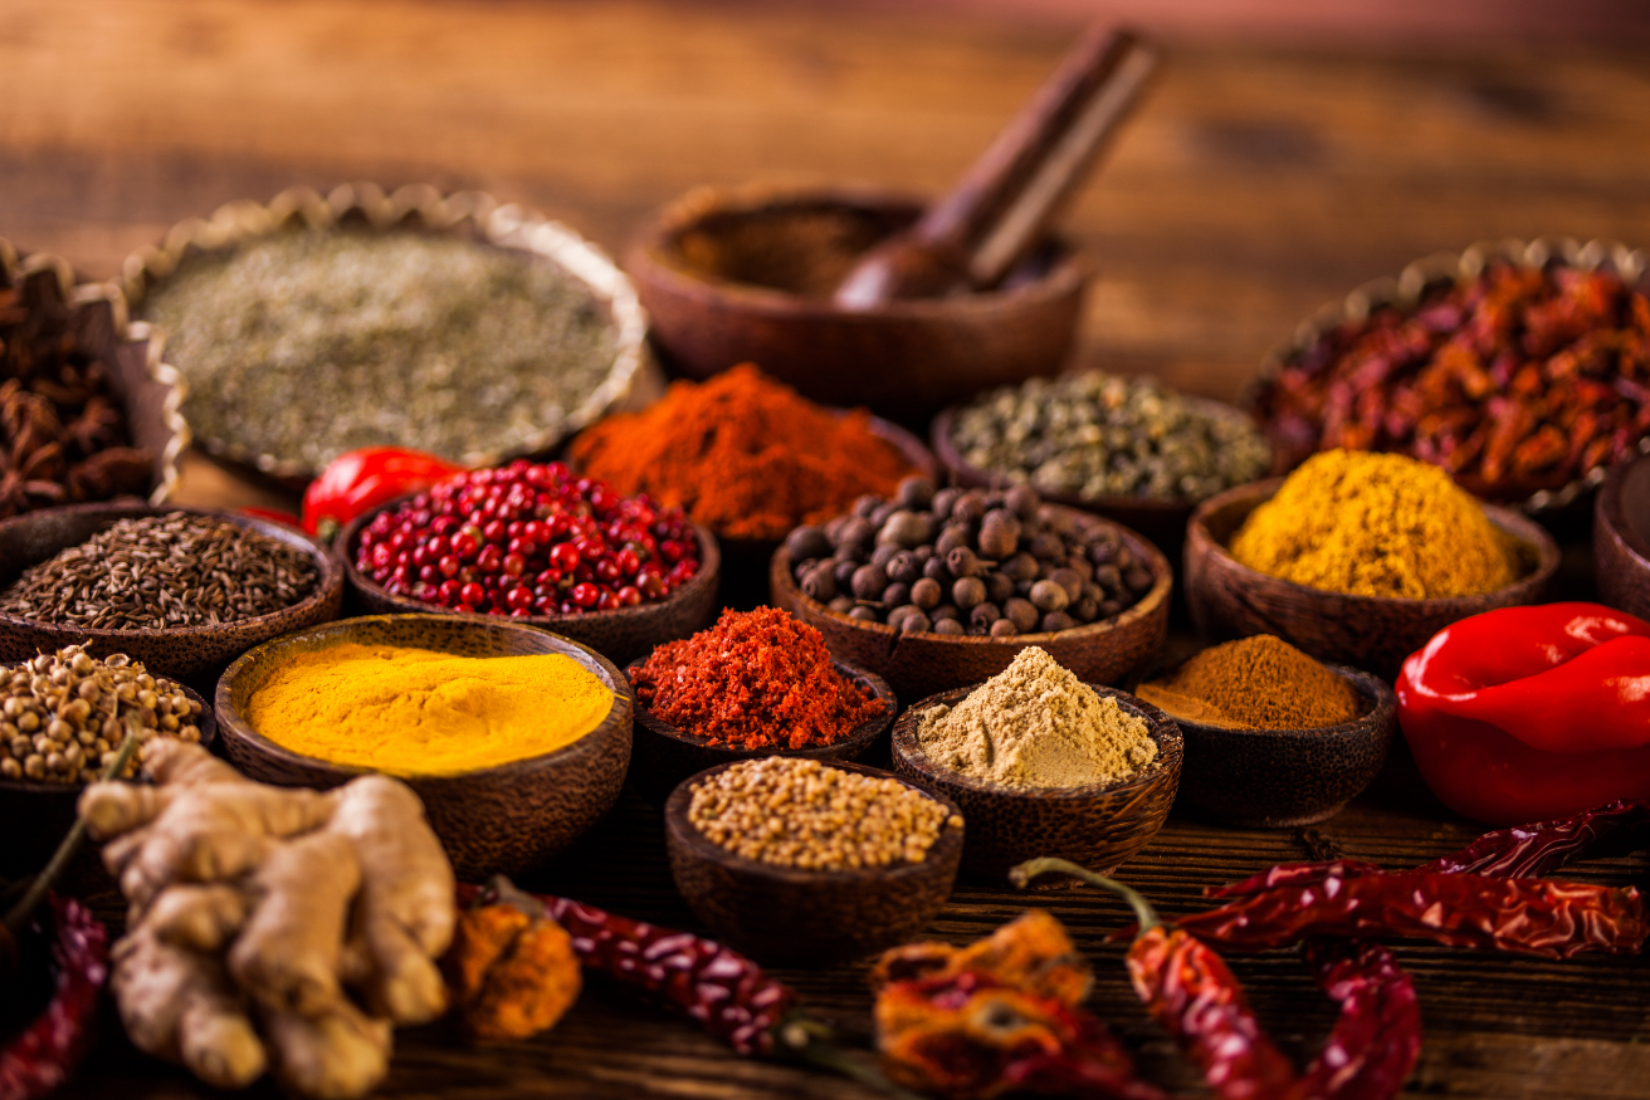 Asian Pride Spices, Blends and Seasonings